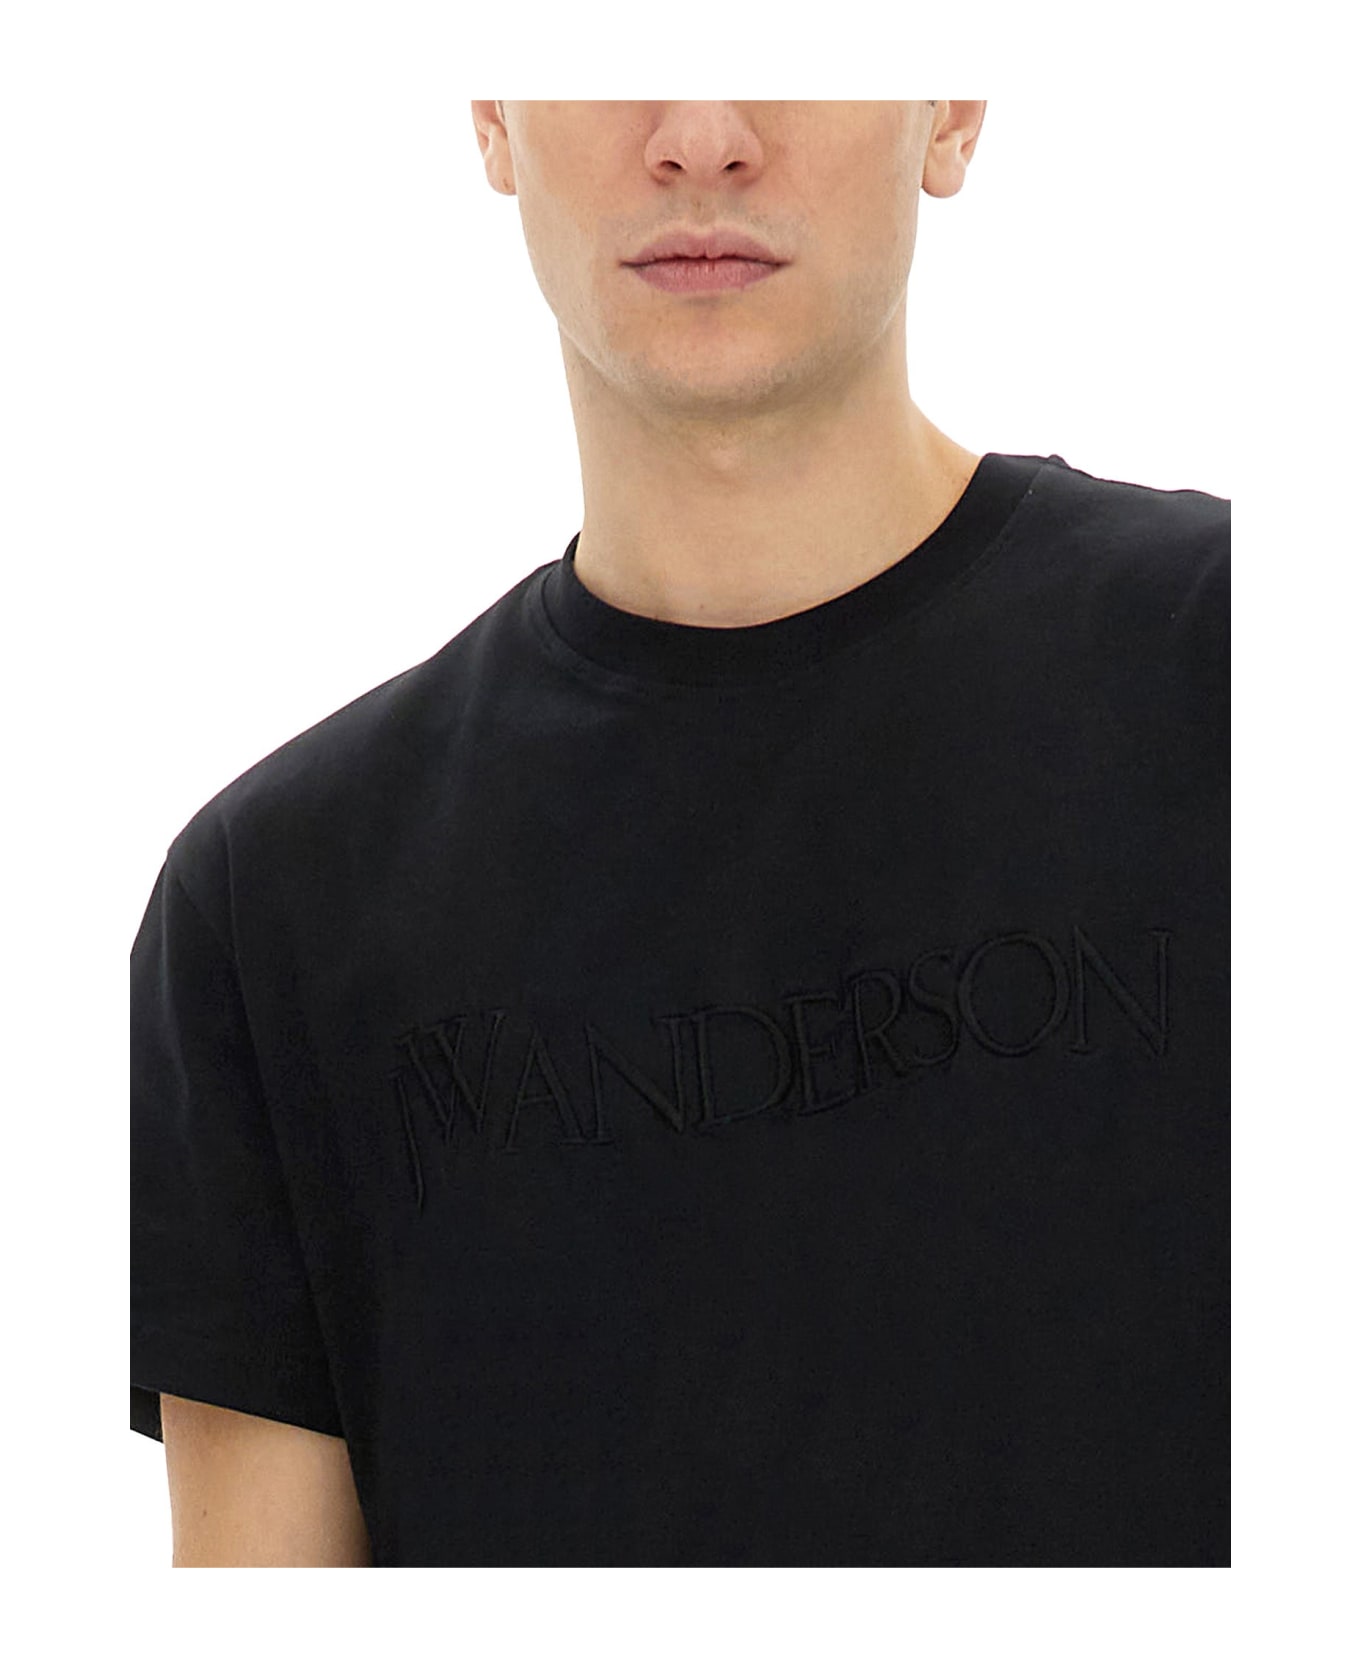 J.W. Anderson T-shirt With Logo - Black シャツ